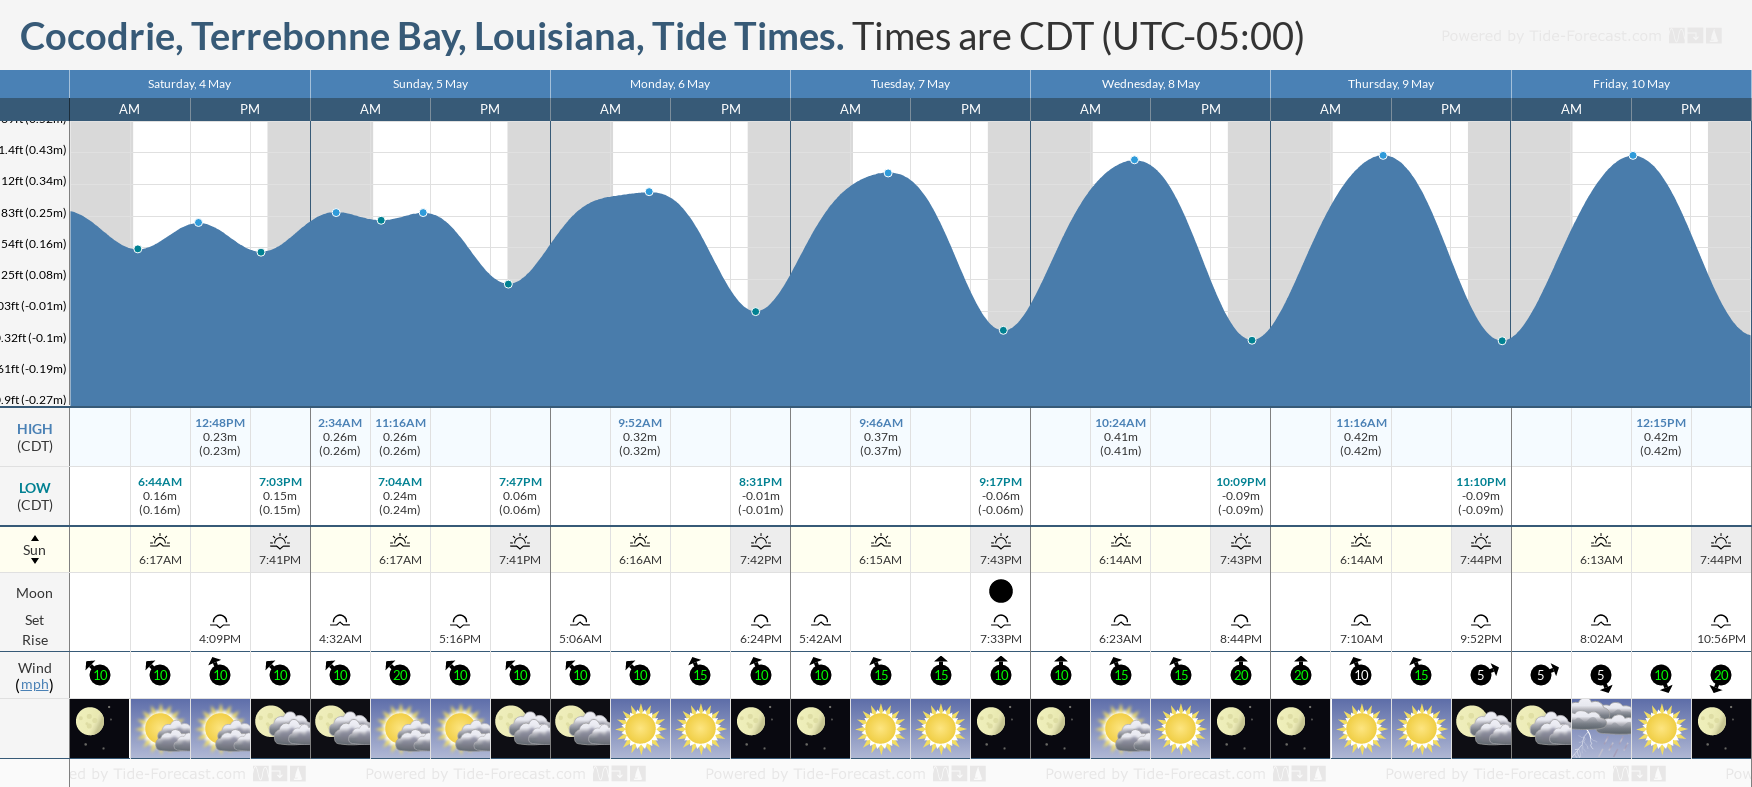 Cocodrie, Terrebonne Bay, Louisiana Tide Chart including high and low tide tide times for the next 7 days